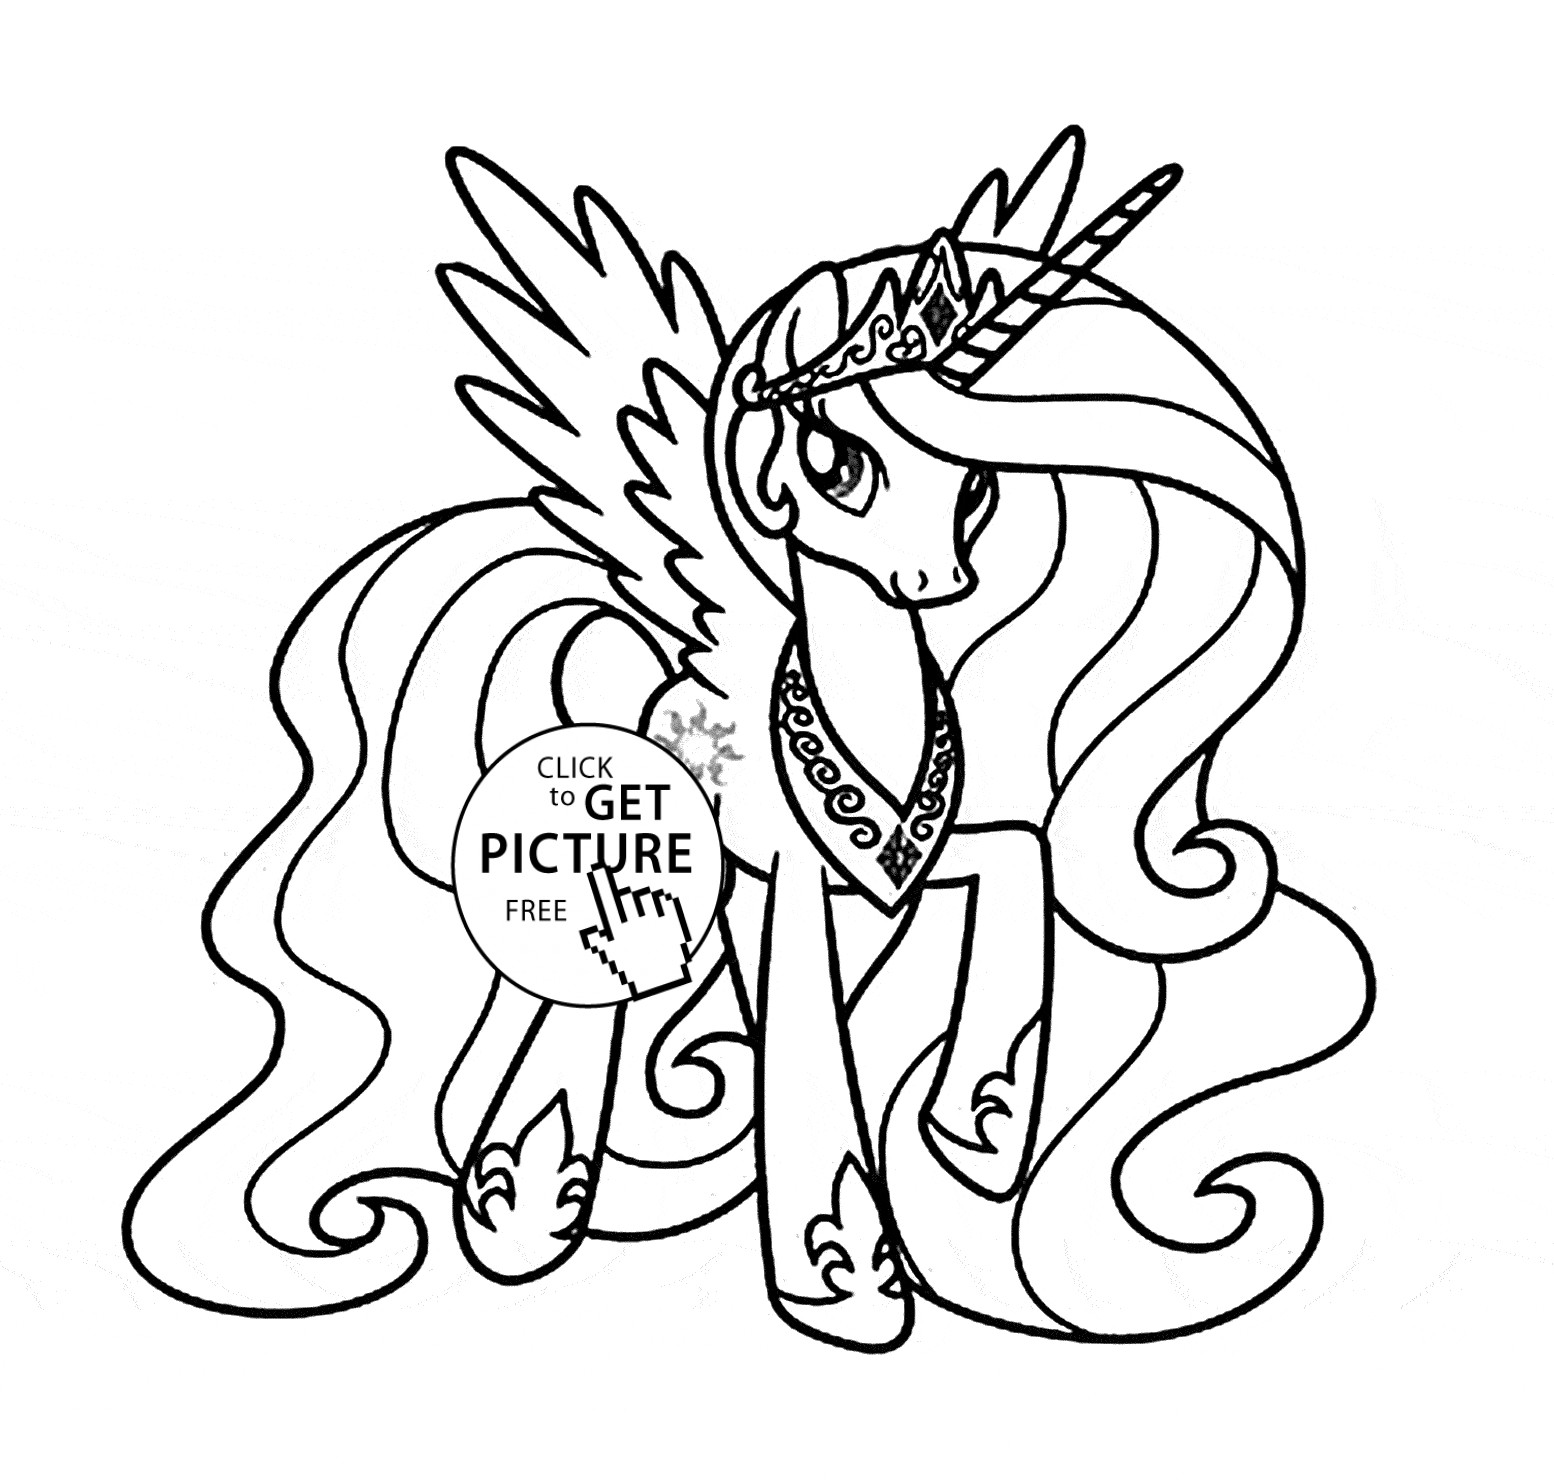 Coloring Sheets For Girls My Little Pony
 Princess Celestia My little pony coloring page for kids